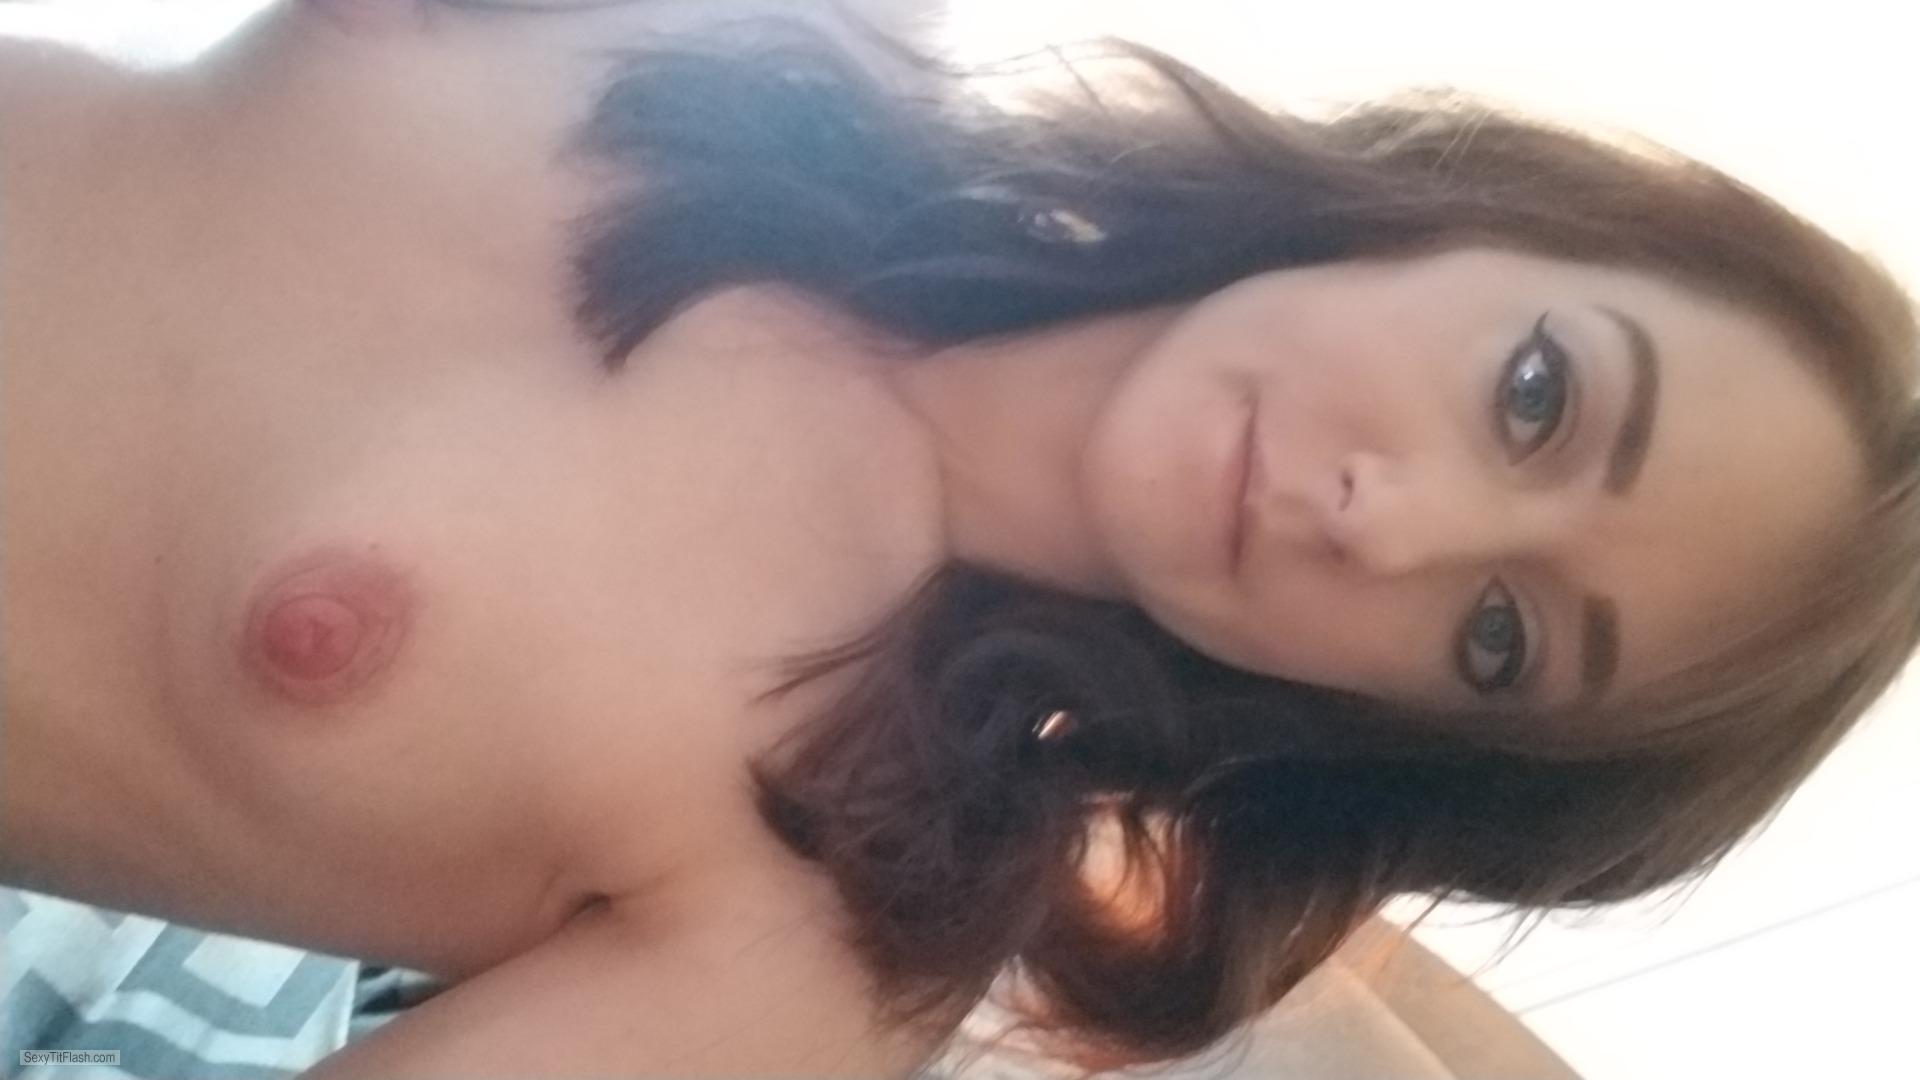 My Very small Tits Topless Selfie by Tiny Tina